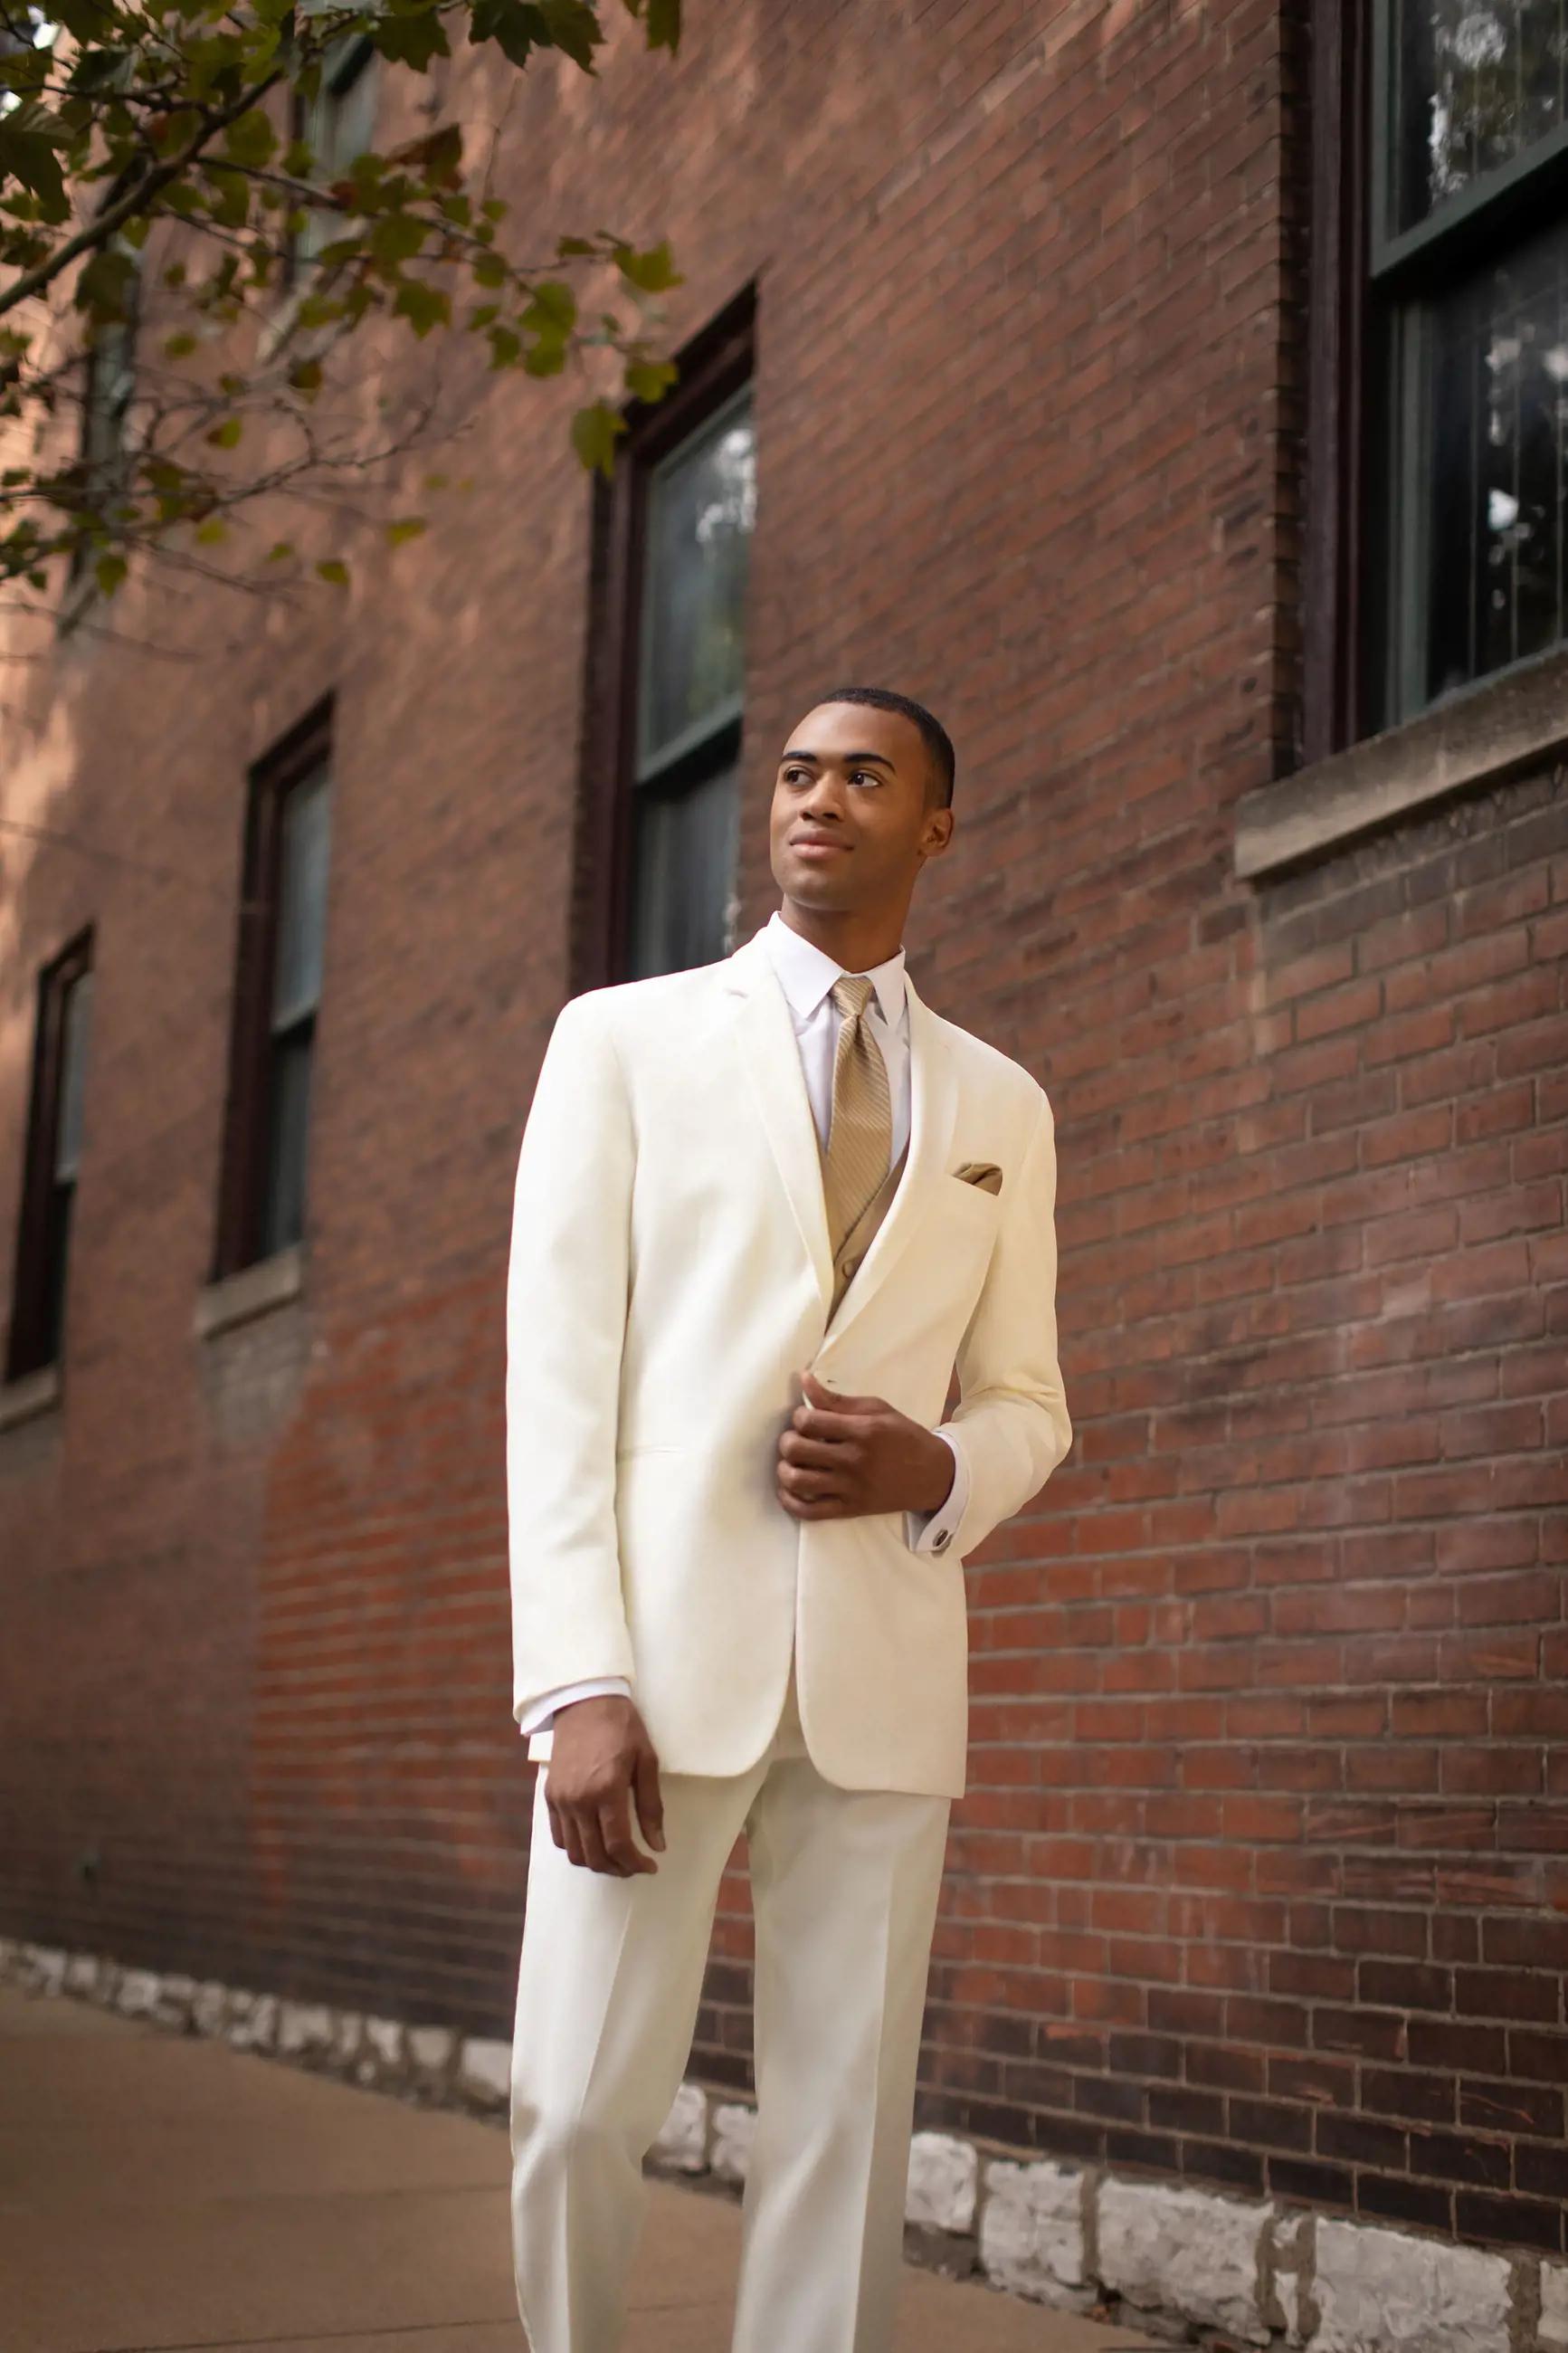 Model wearing a white suit at the street